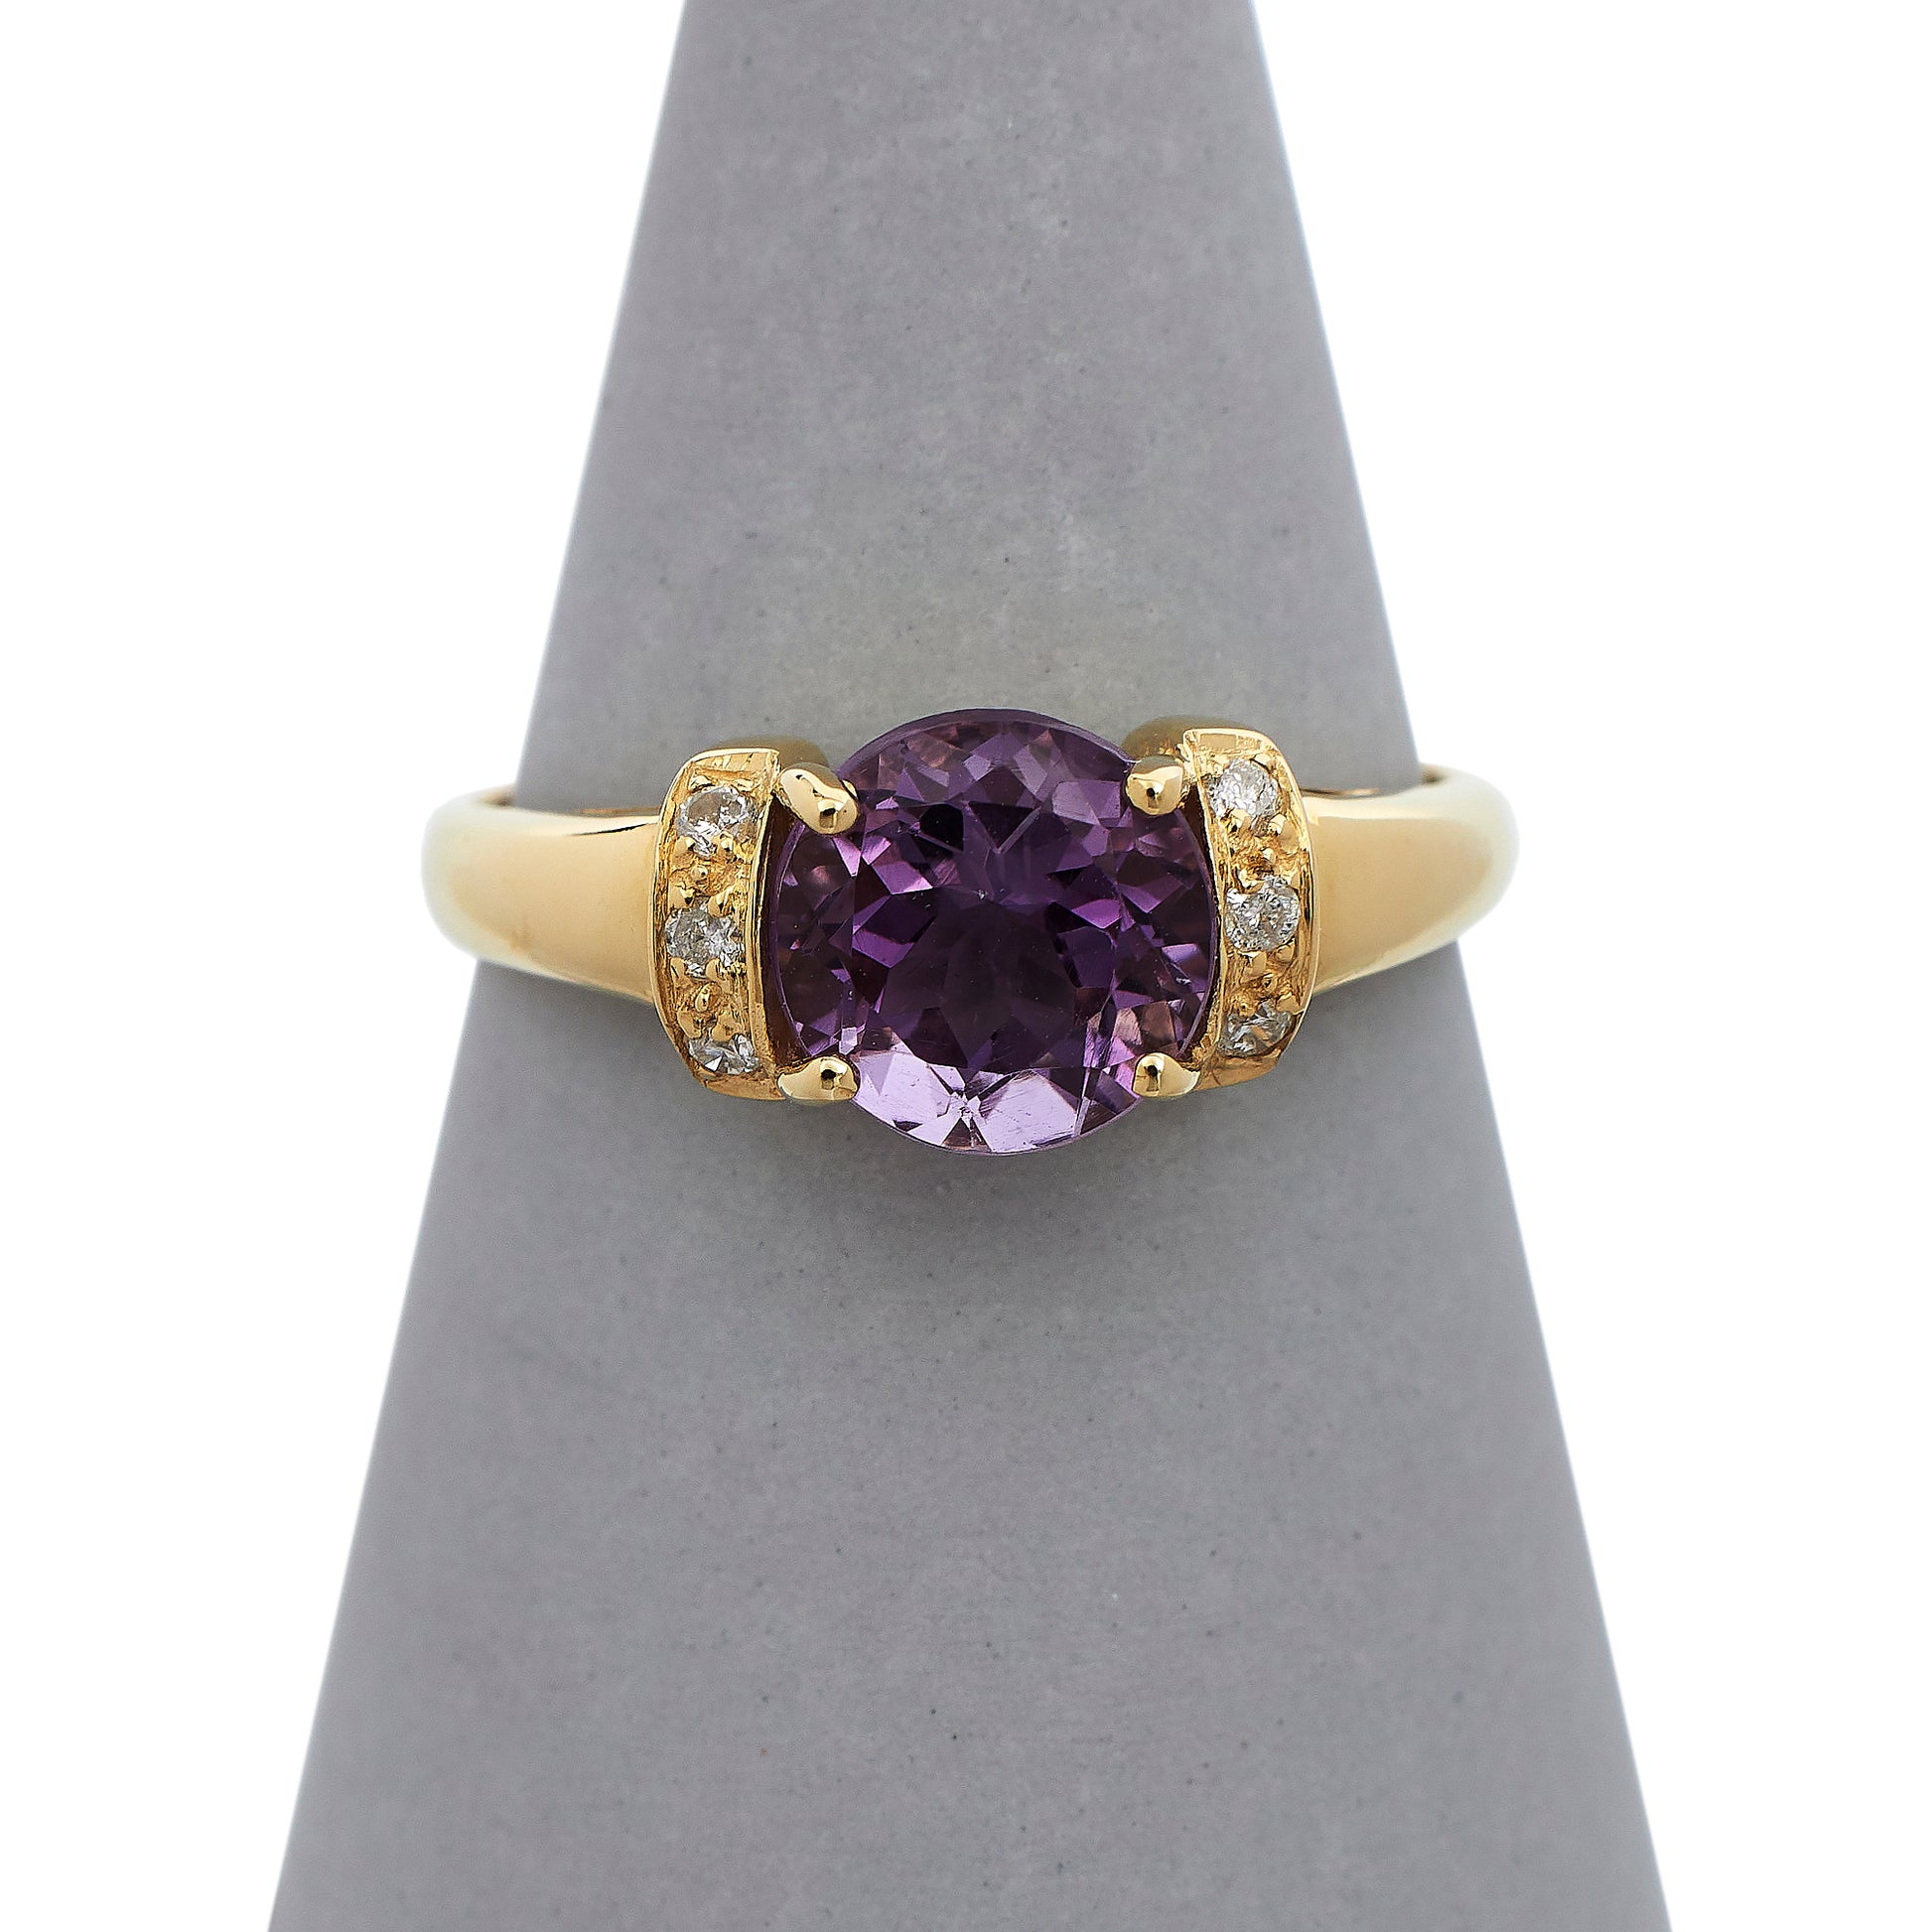 Pre-Owned 9ct Yellow Gold Amethyst & Diamond Dress Ring